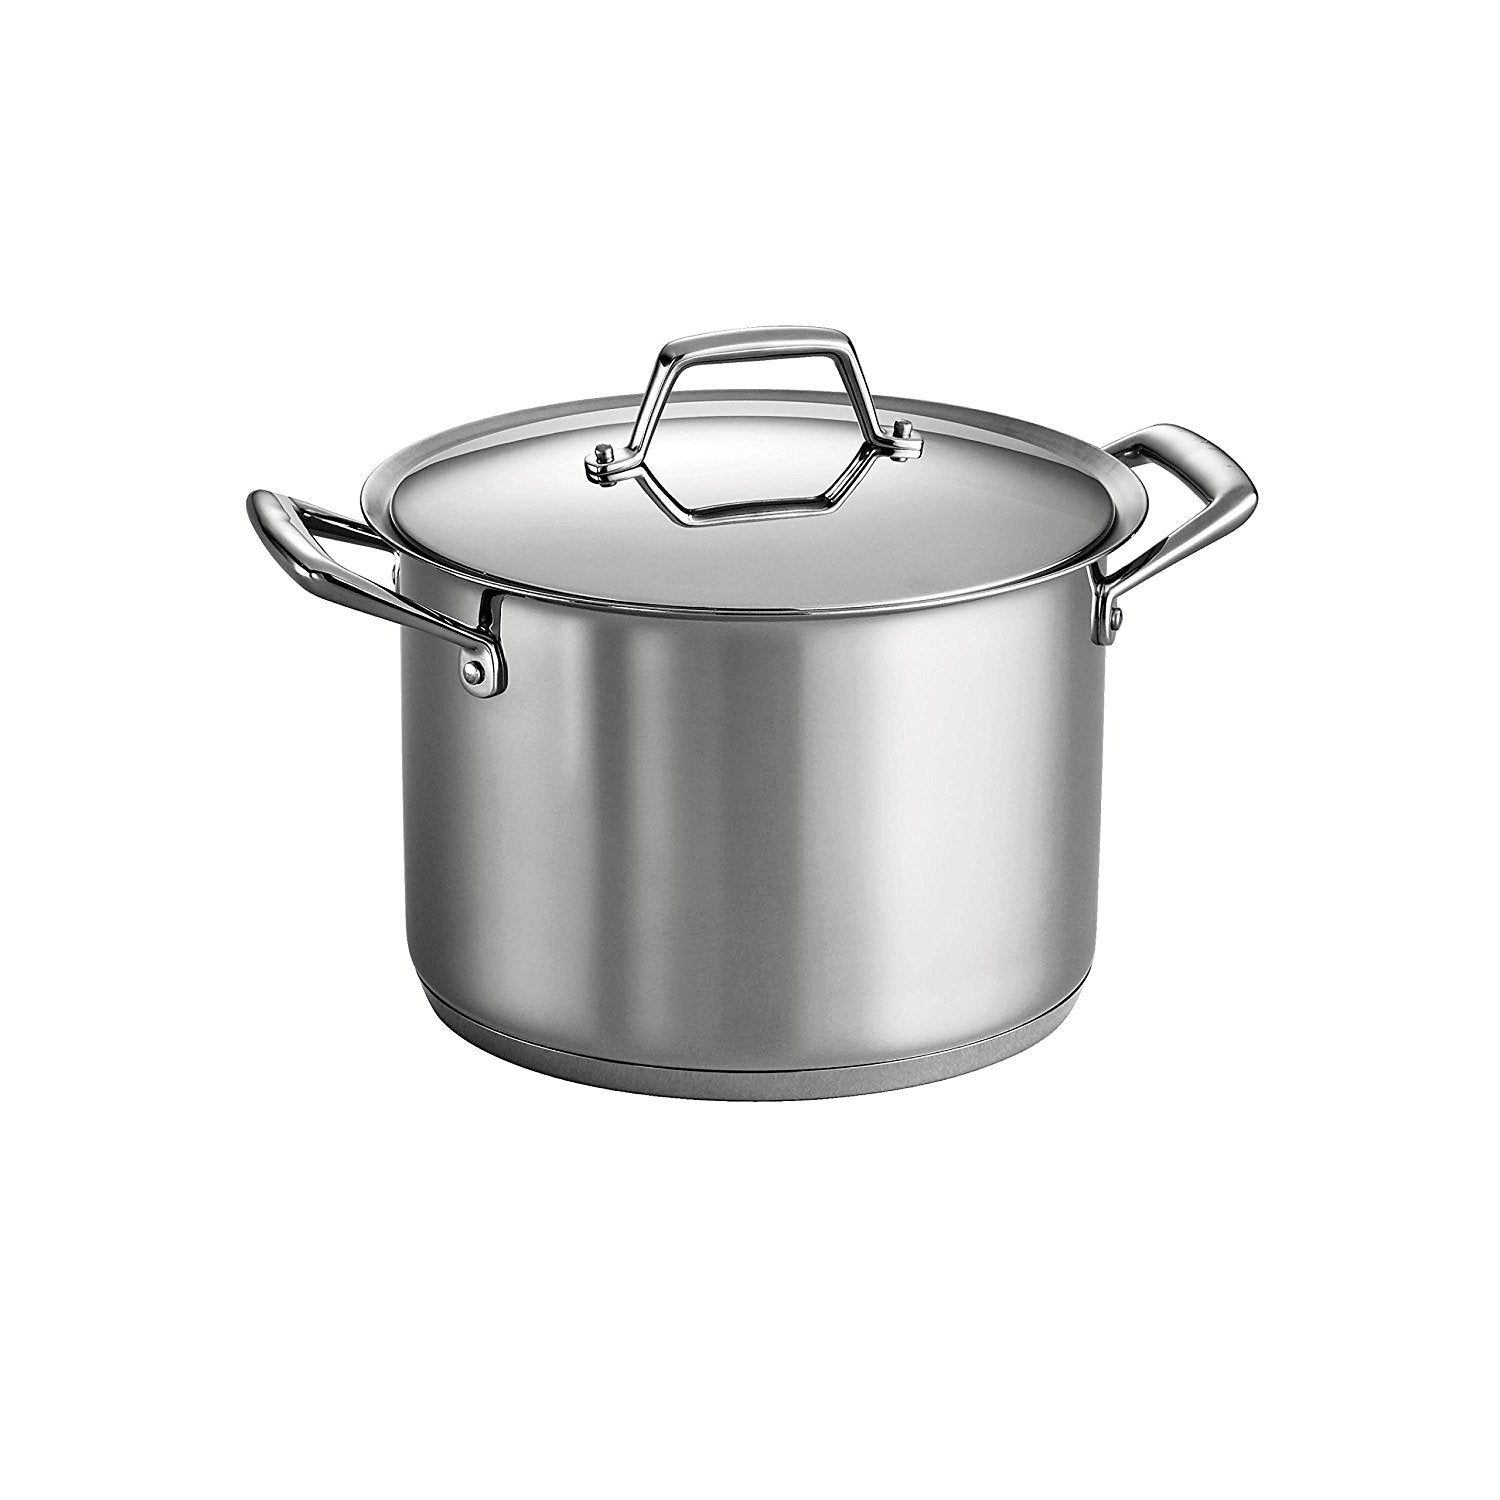 Tramontina Prima 80101/012 12QT 18/10 Tri-Ply Base Covered Stock Pot, Stainless Steel - Induction Ready, Dishwasher Safe, Oven Safe COOKPOT